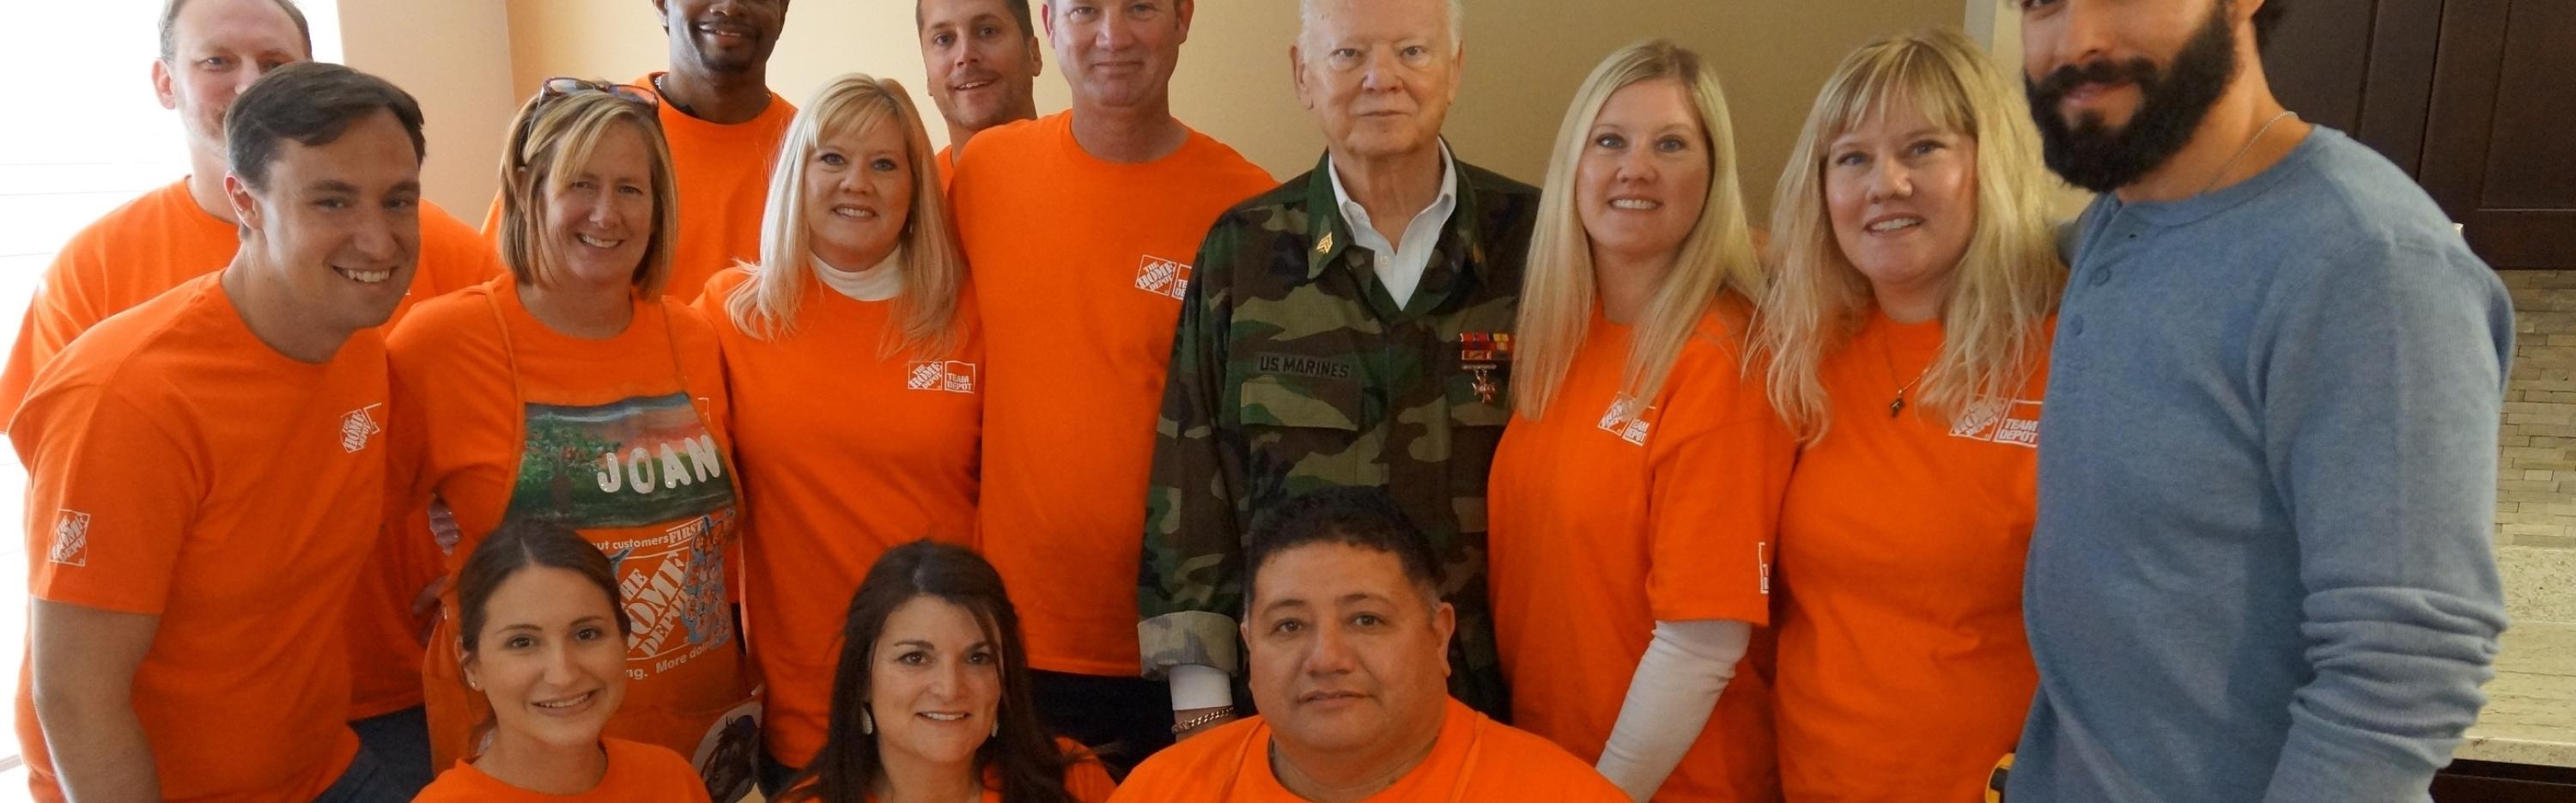 Team Depot and Steve Harvey Tackle Safety Repairs for Veteran Diagnosed with Cancer